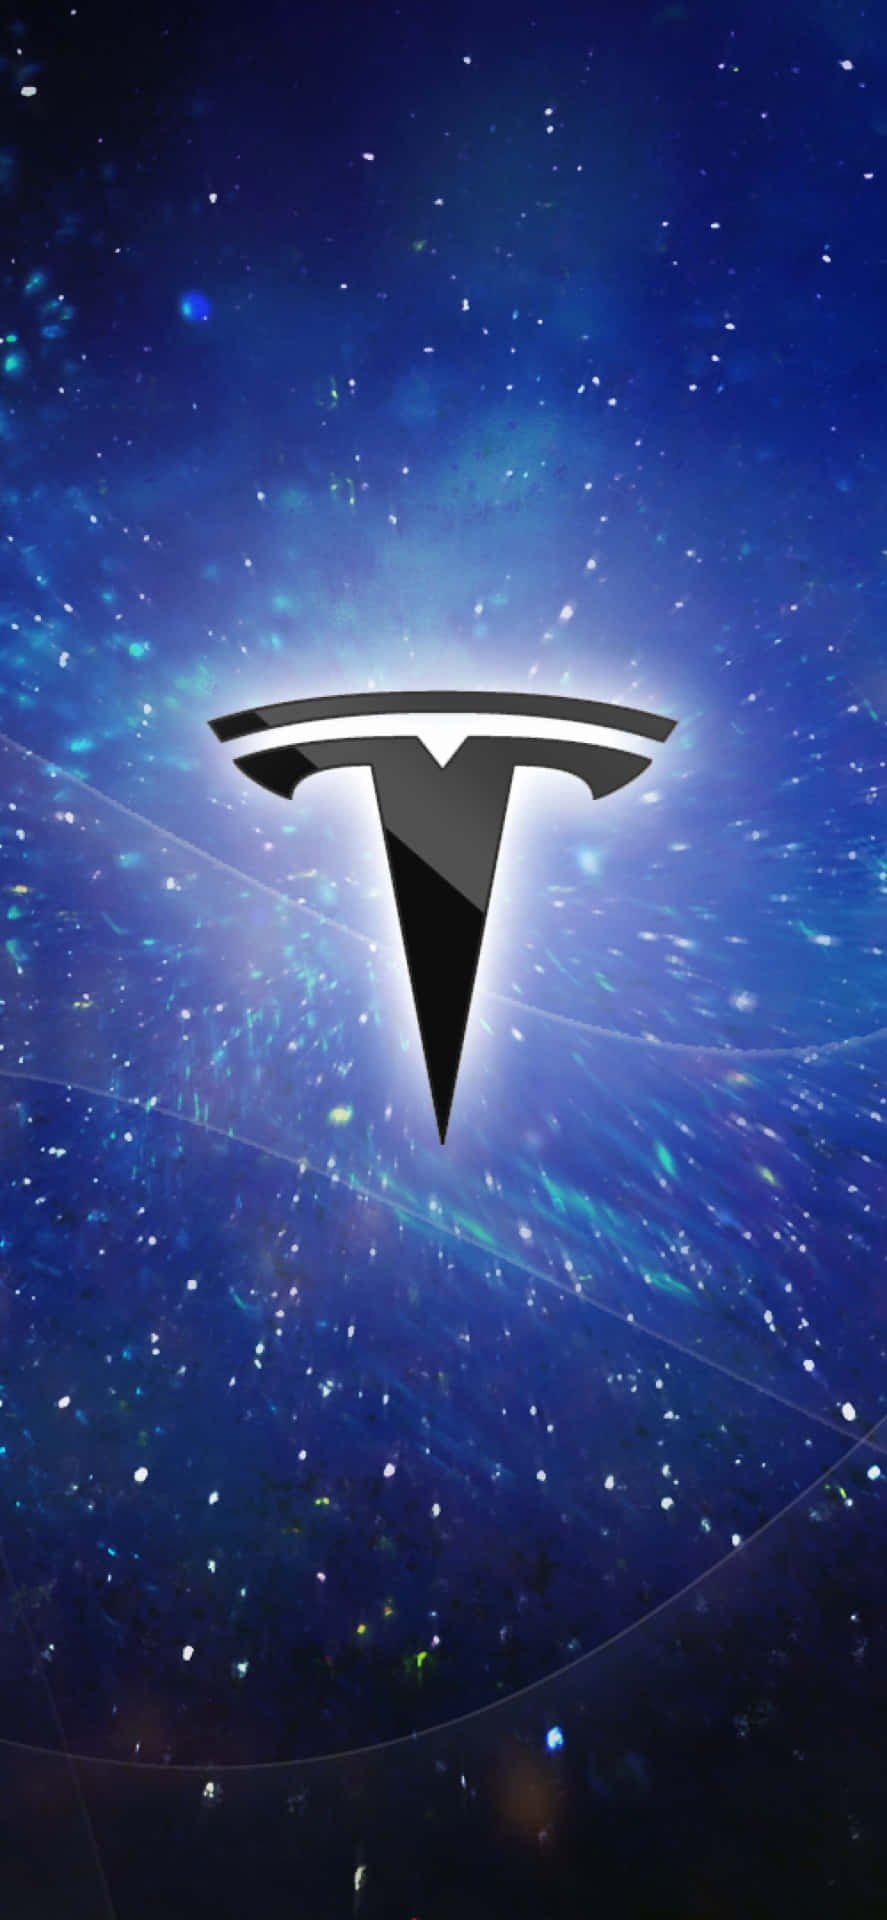 Share more than 66 cool tesla logo wallpaper latest - in.cdgdbentre